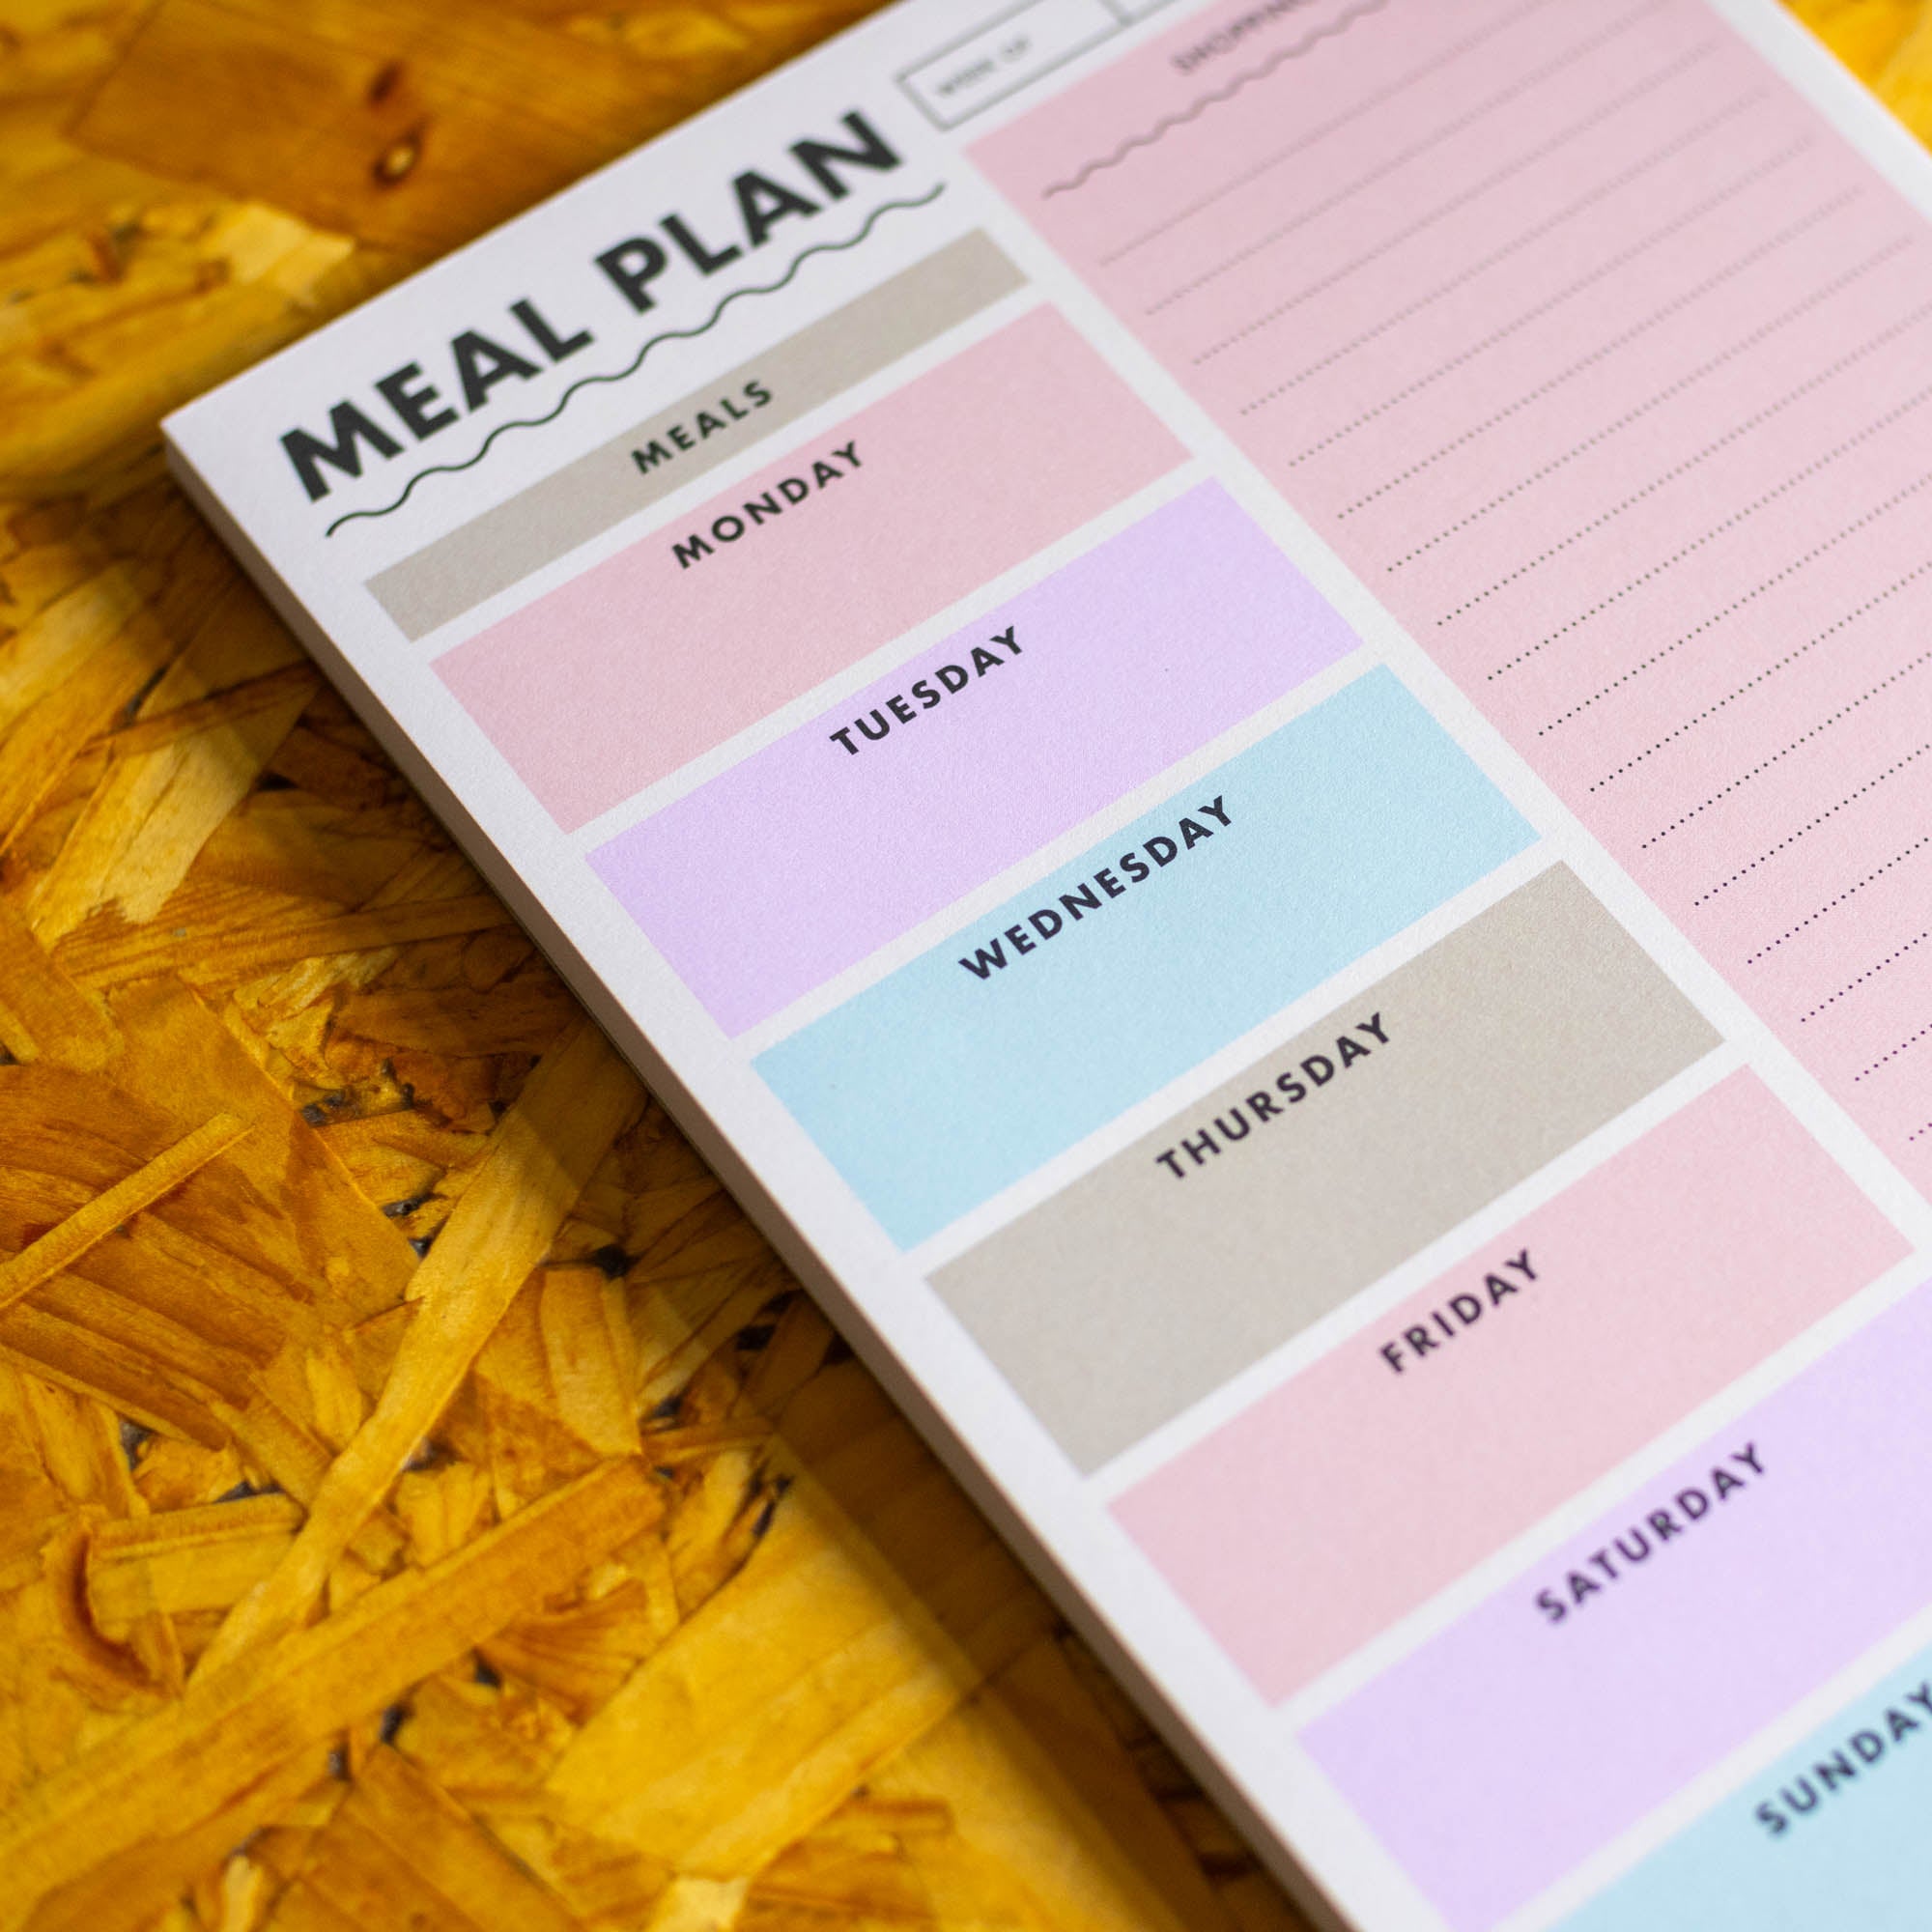 Colour Block Meal Plan A5 Notepad